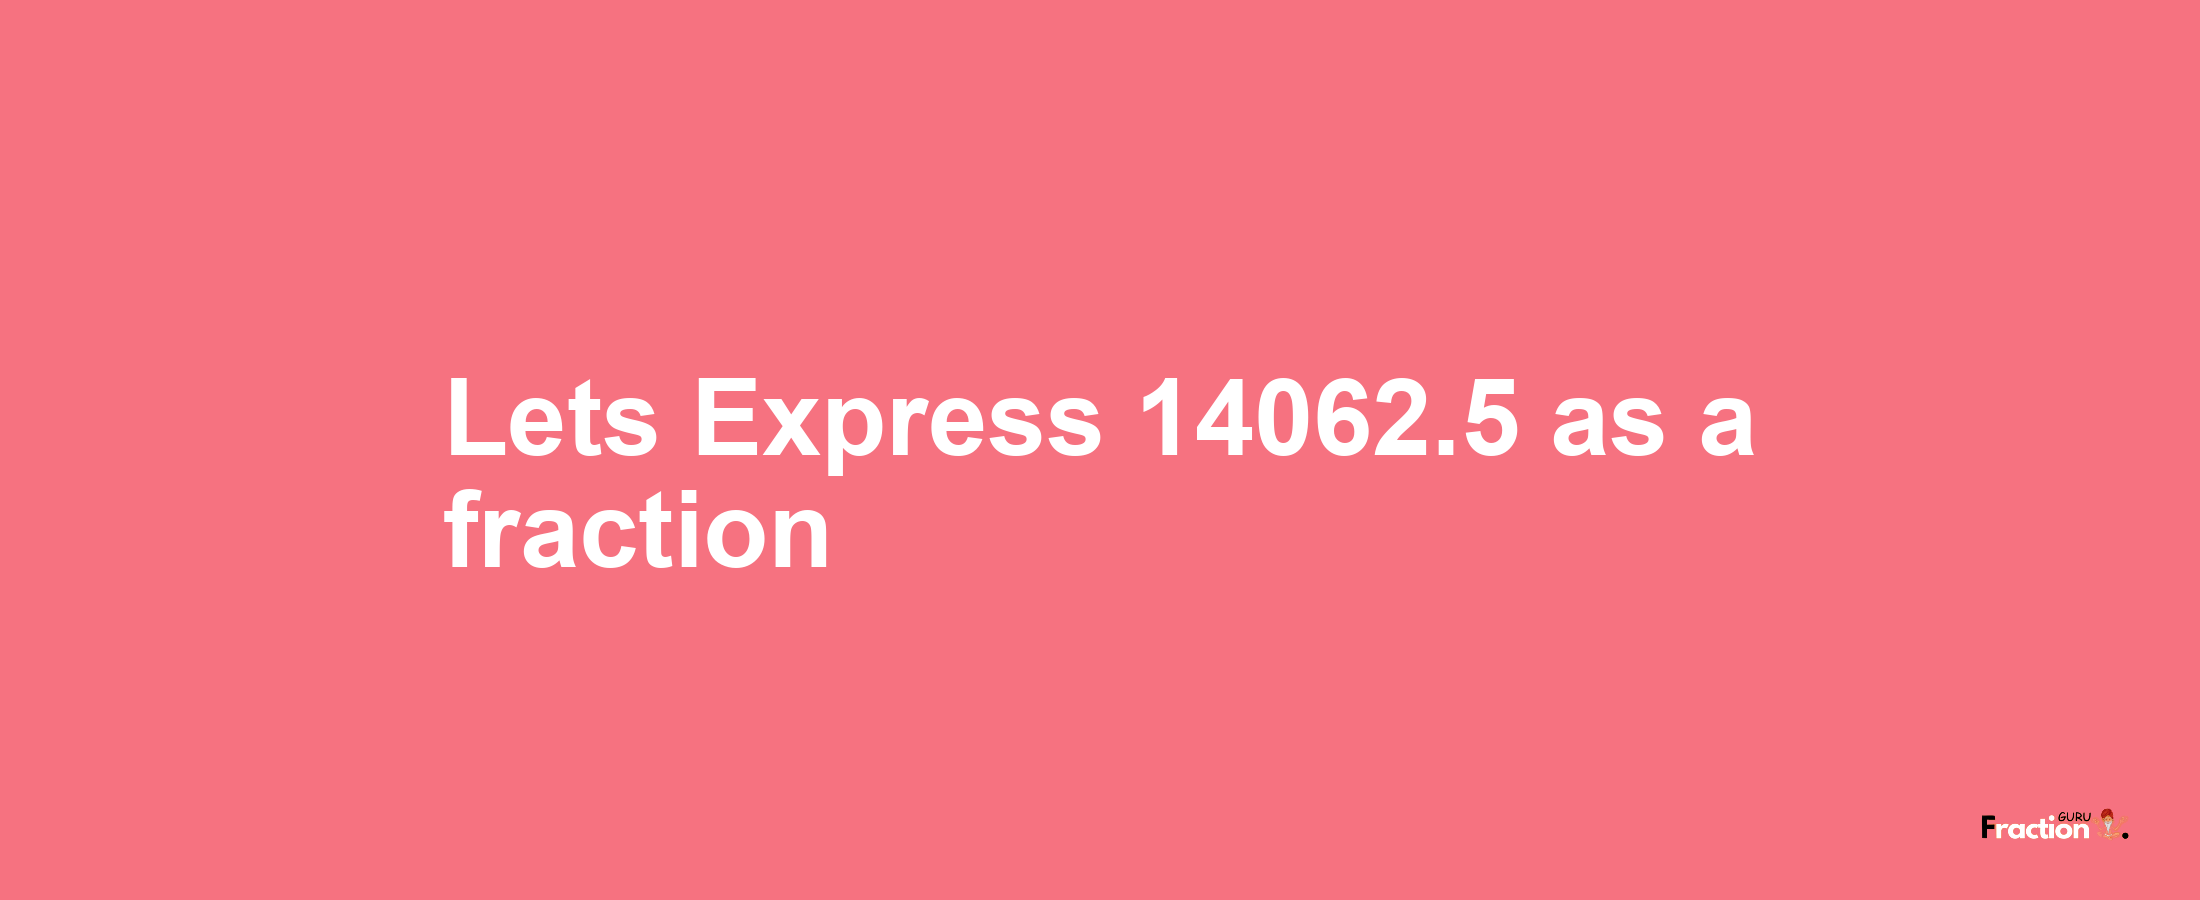 Lets Express 14062.5 as afraction